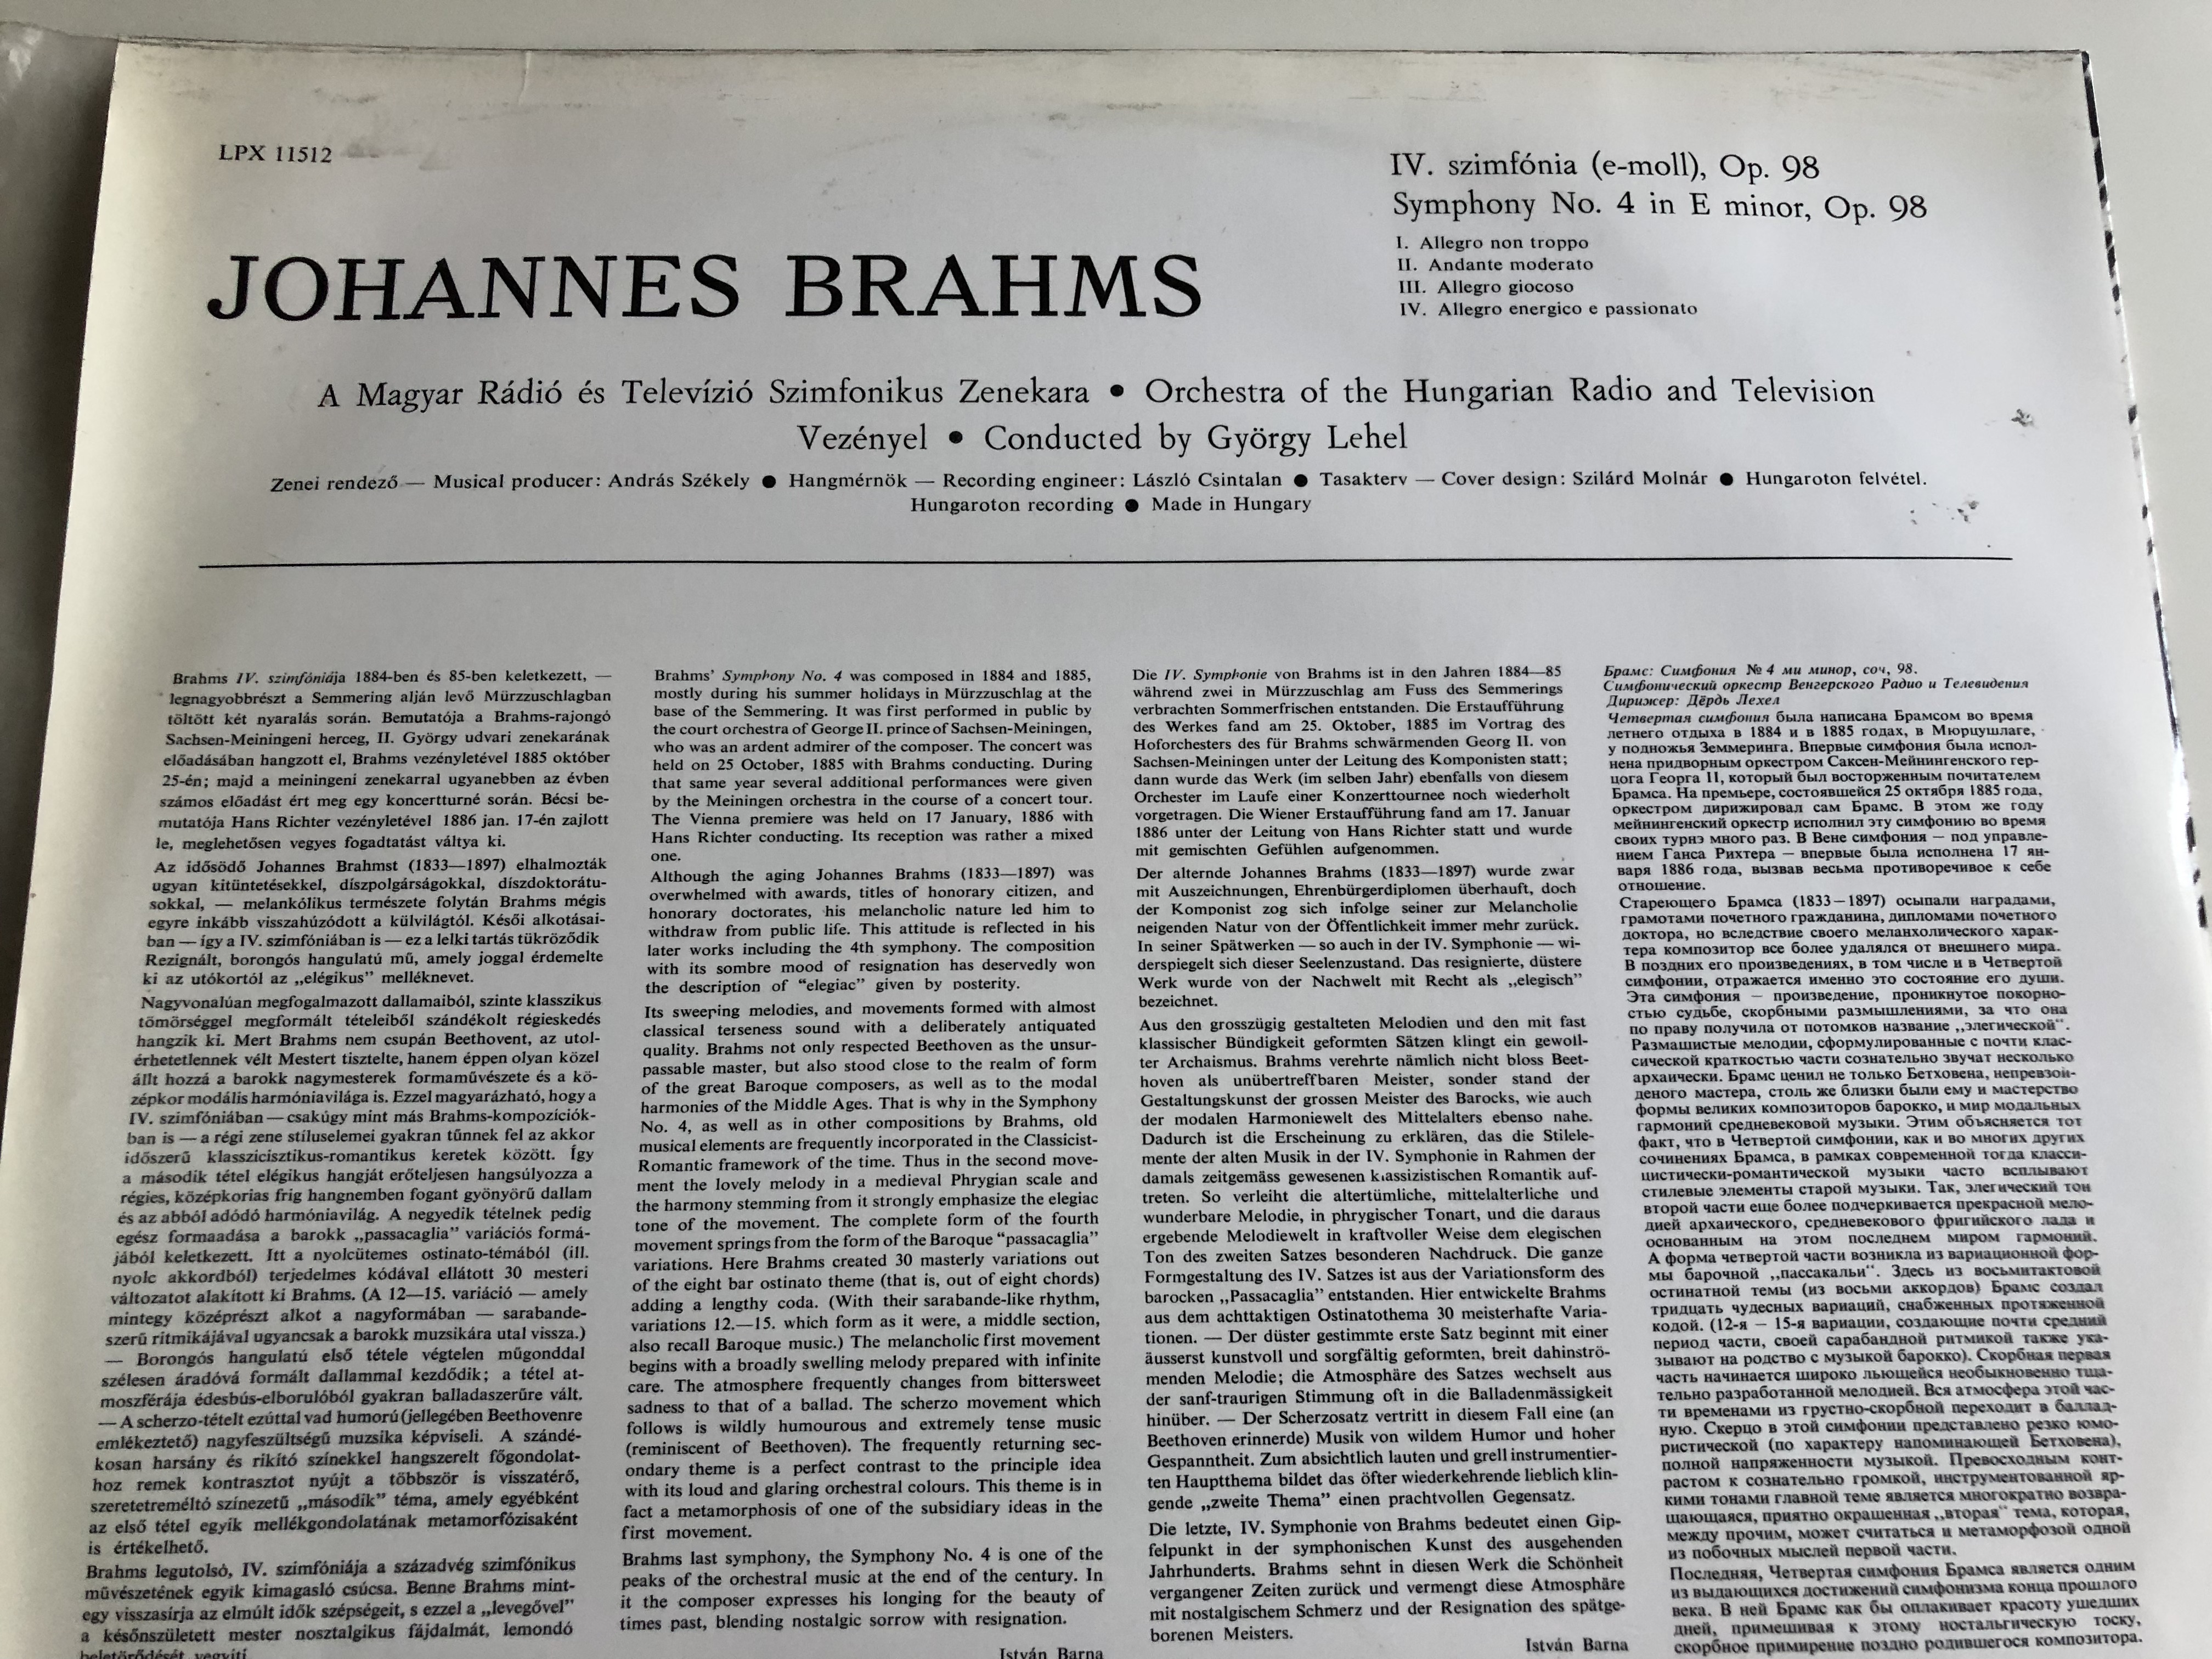 brahms-symphonie-no.-4-in-e-minor-op.-98-conducted-gy-rgy-lehel-orchestra-of-the-hungarian-radio-and-television-hungaroton-lp-stereo-mono-lpx-11512-3-.jpg